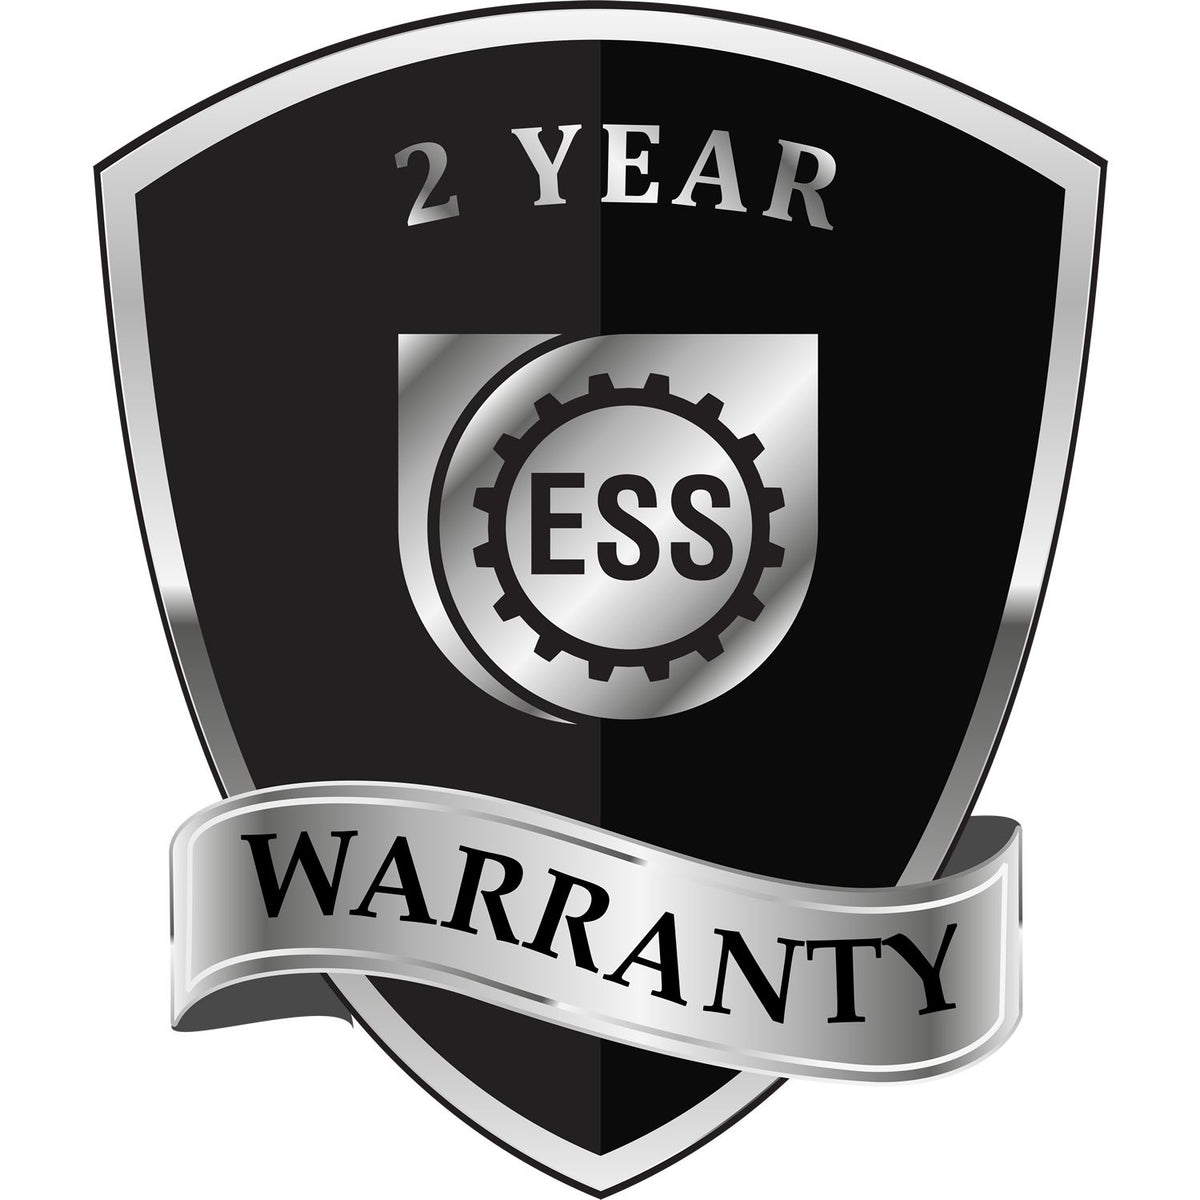 A black and silver badge or emblem showing warranty information for the Hybrid Arizona Engineer Seal